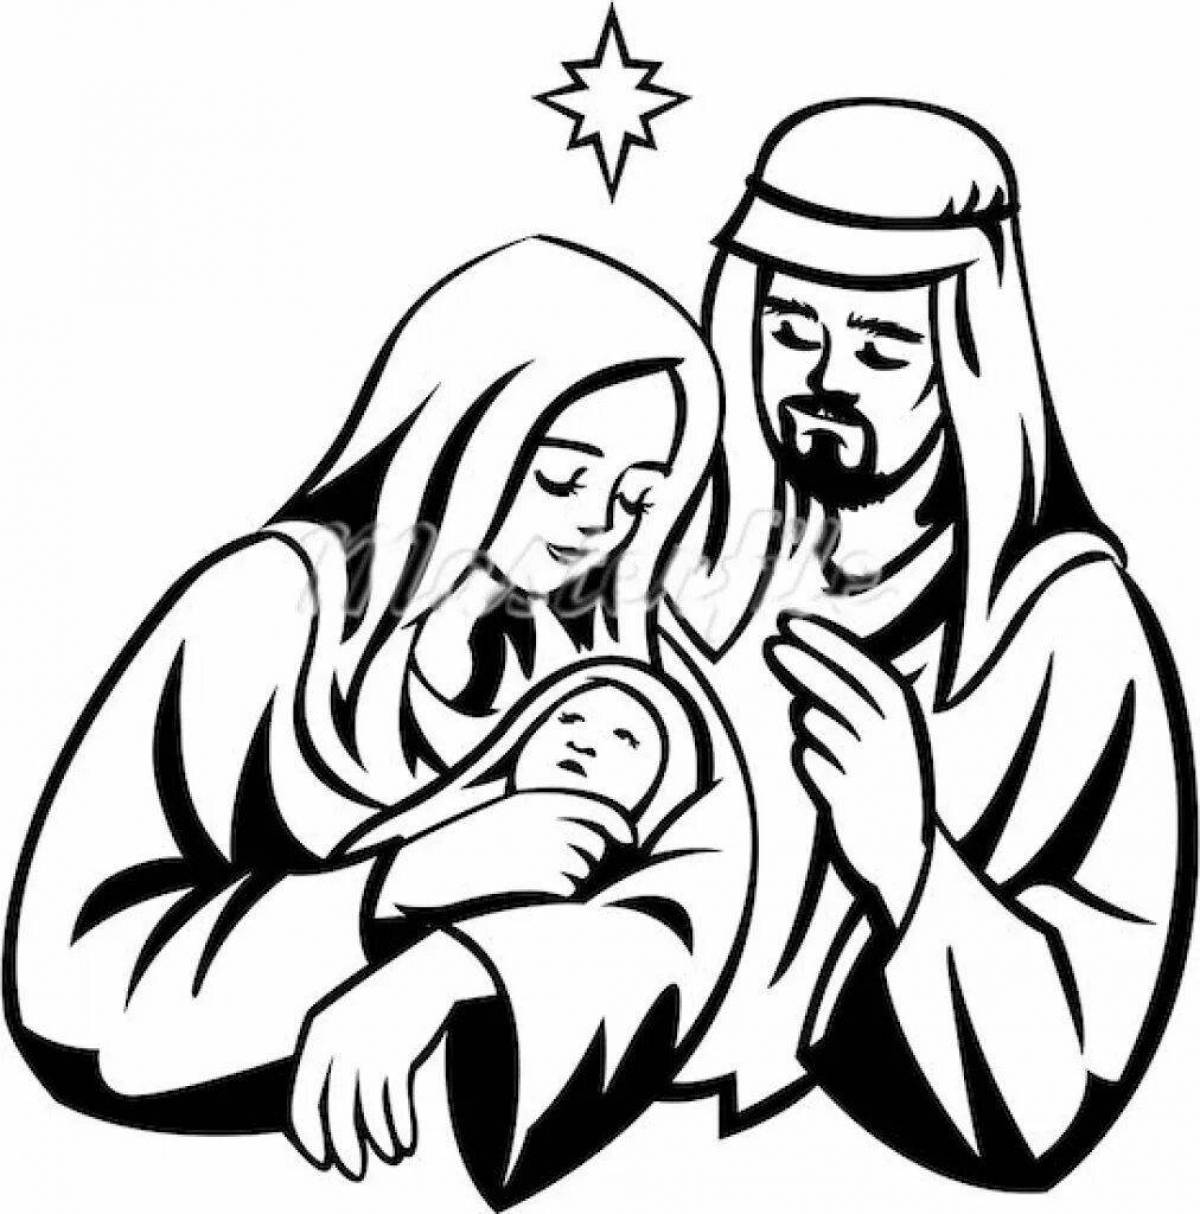 Coloring page magnanimous jesus in the manger